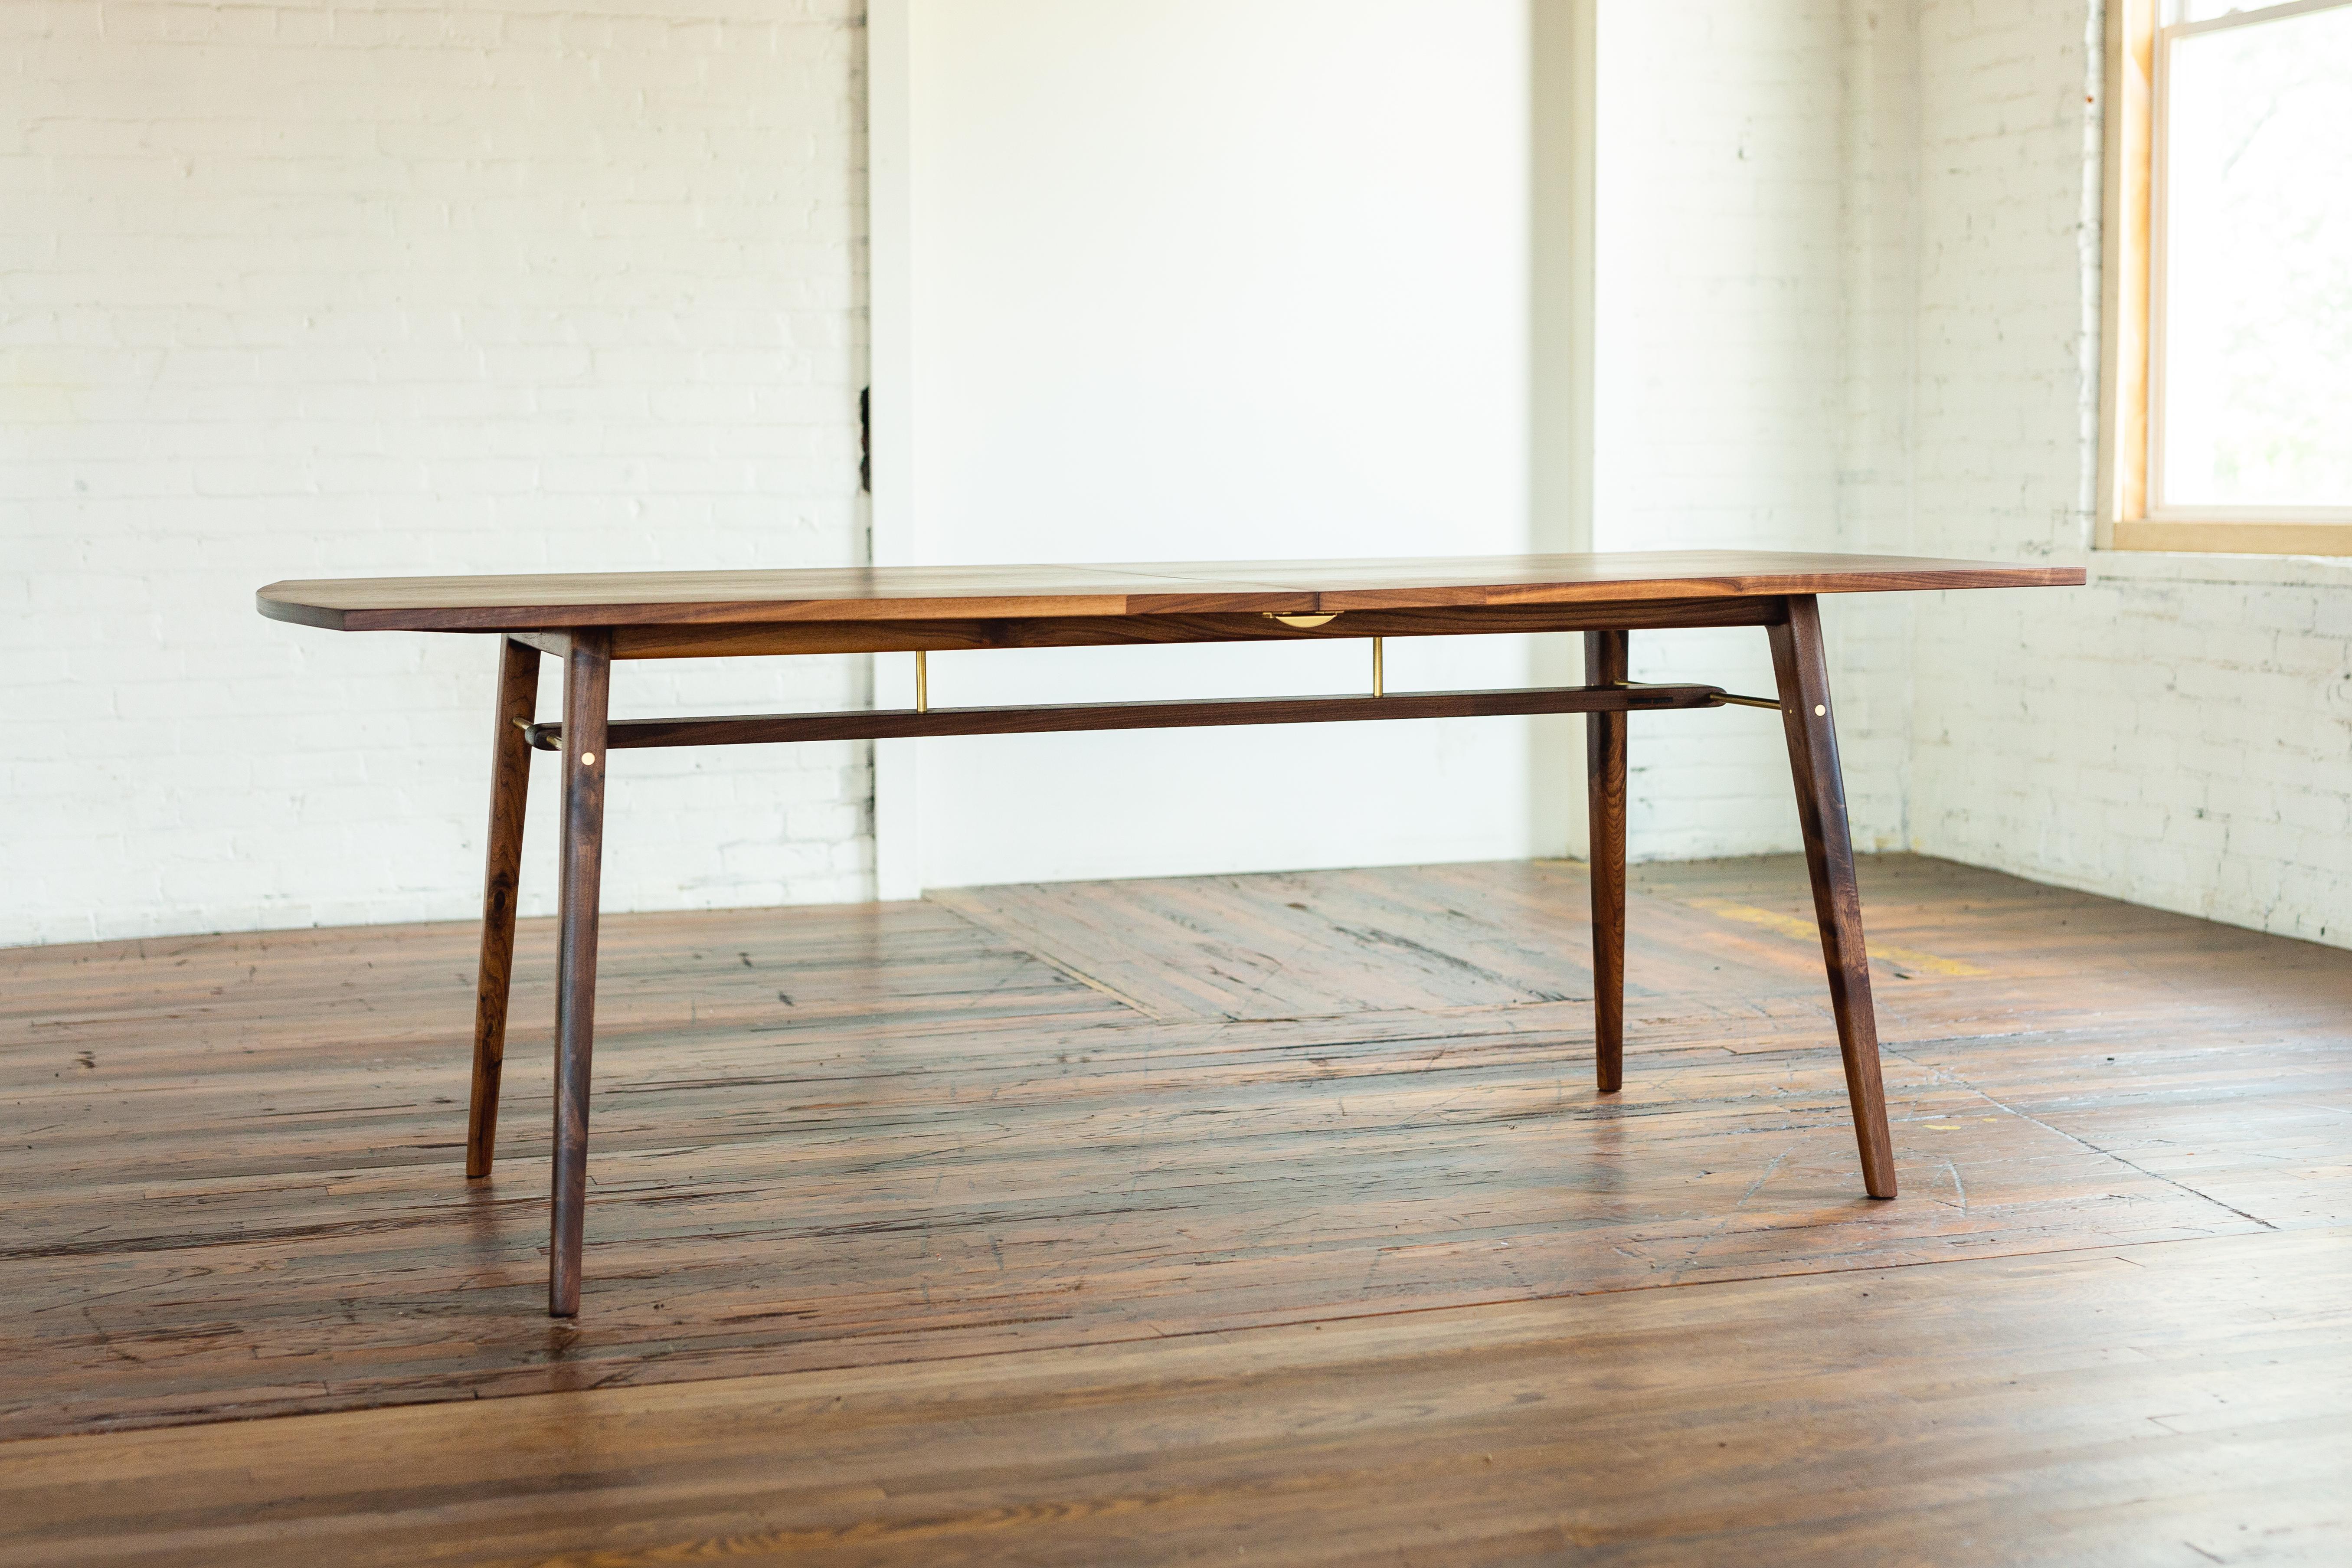 A modern extension table with an abundance of details. Clean lines accented by simple curves.

Solid black walnut wood top and base with detailed brass joinery.
Brass locking hardware to keep the table flush when in closed or extended